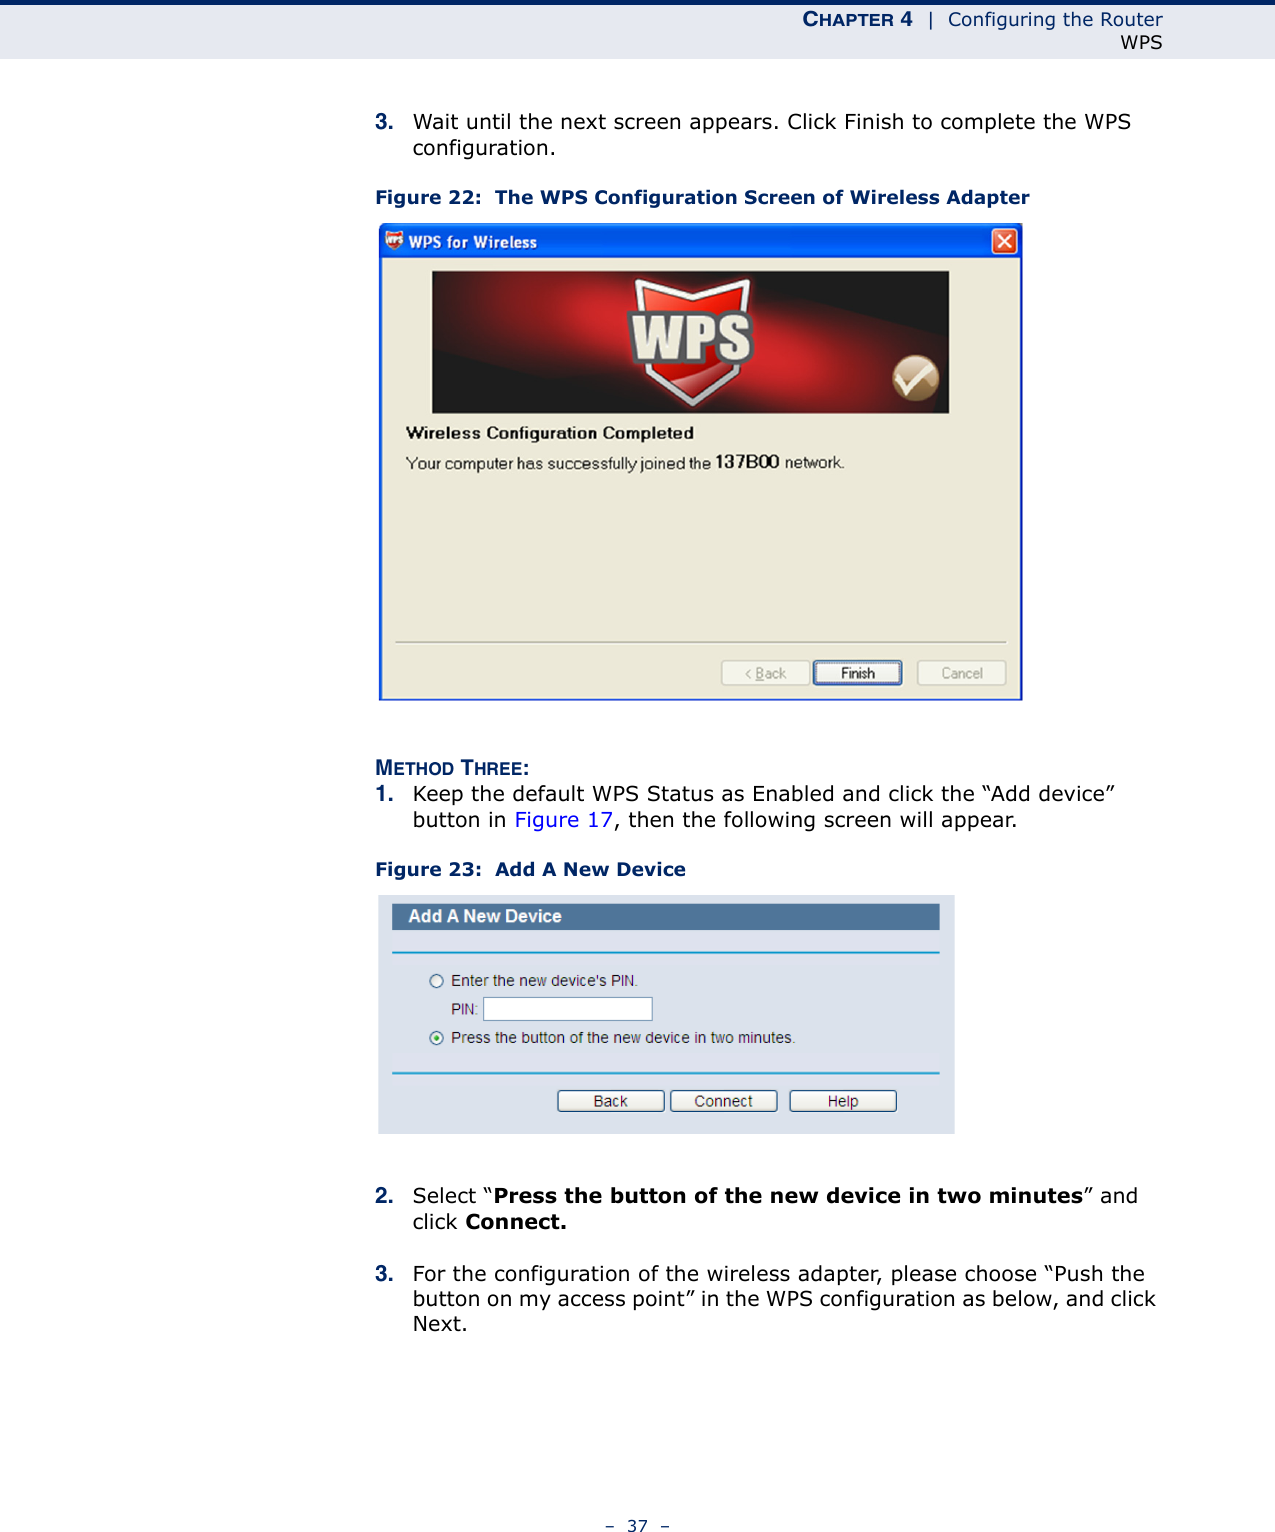 CHAPTER 4  |  Configuring the RouterWPS–  37  –3. Wait until the next screen appears. Click Finish to complete the WPS configuration.Figure 22:  The WPS Configuration Screen of Wireless Adapter METHOD THREE:1. Keep the default WPS Status as Enabled and click the “Add device” button in Figure 17, then the following screen will appear.Figure 23:  Add A New Device2. Select “Press the button of the new device in two minutes” and click Connect.3. For the configuration of the wireless adapter, please choose “Push the button on my access point” in the WPS configuration as below, and click Next. 